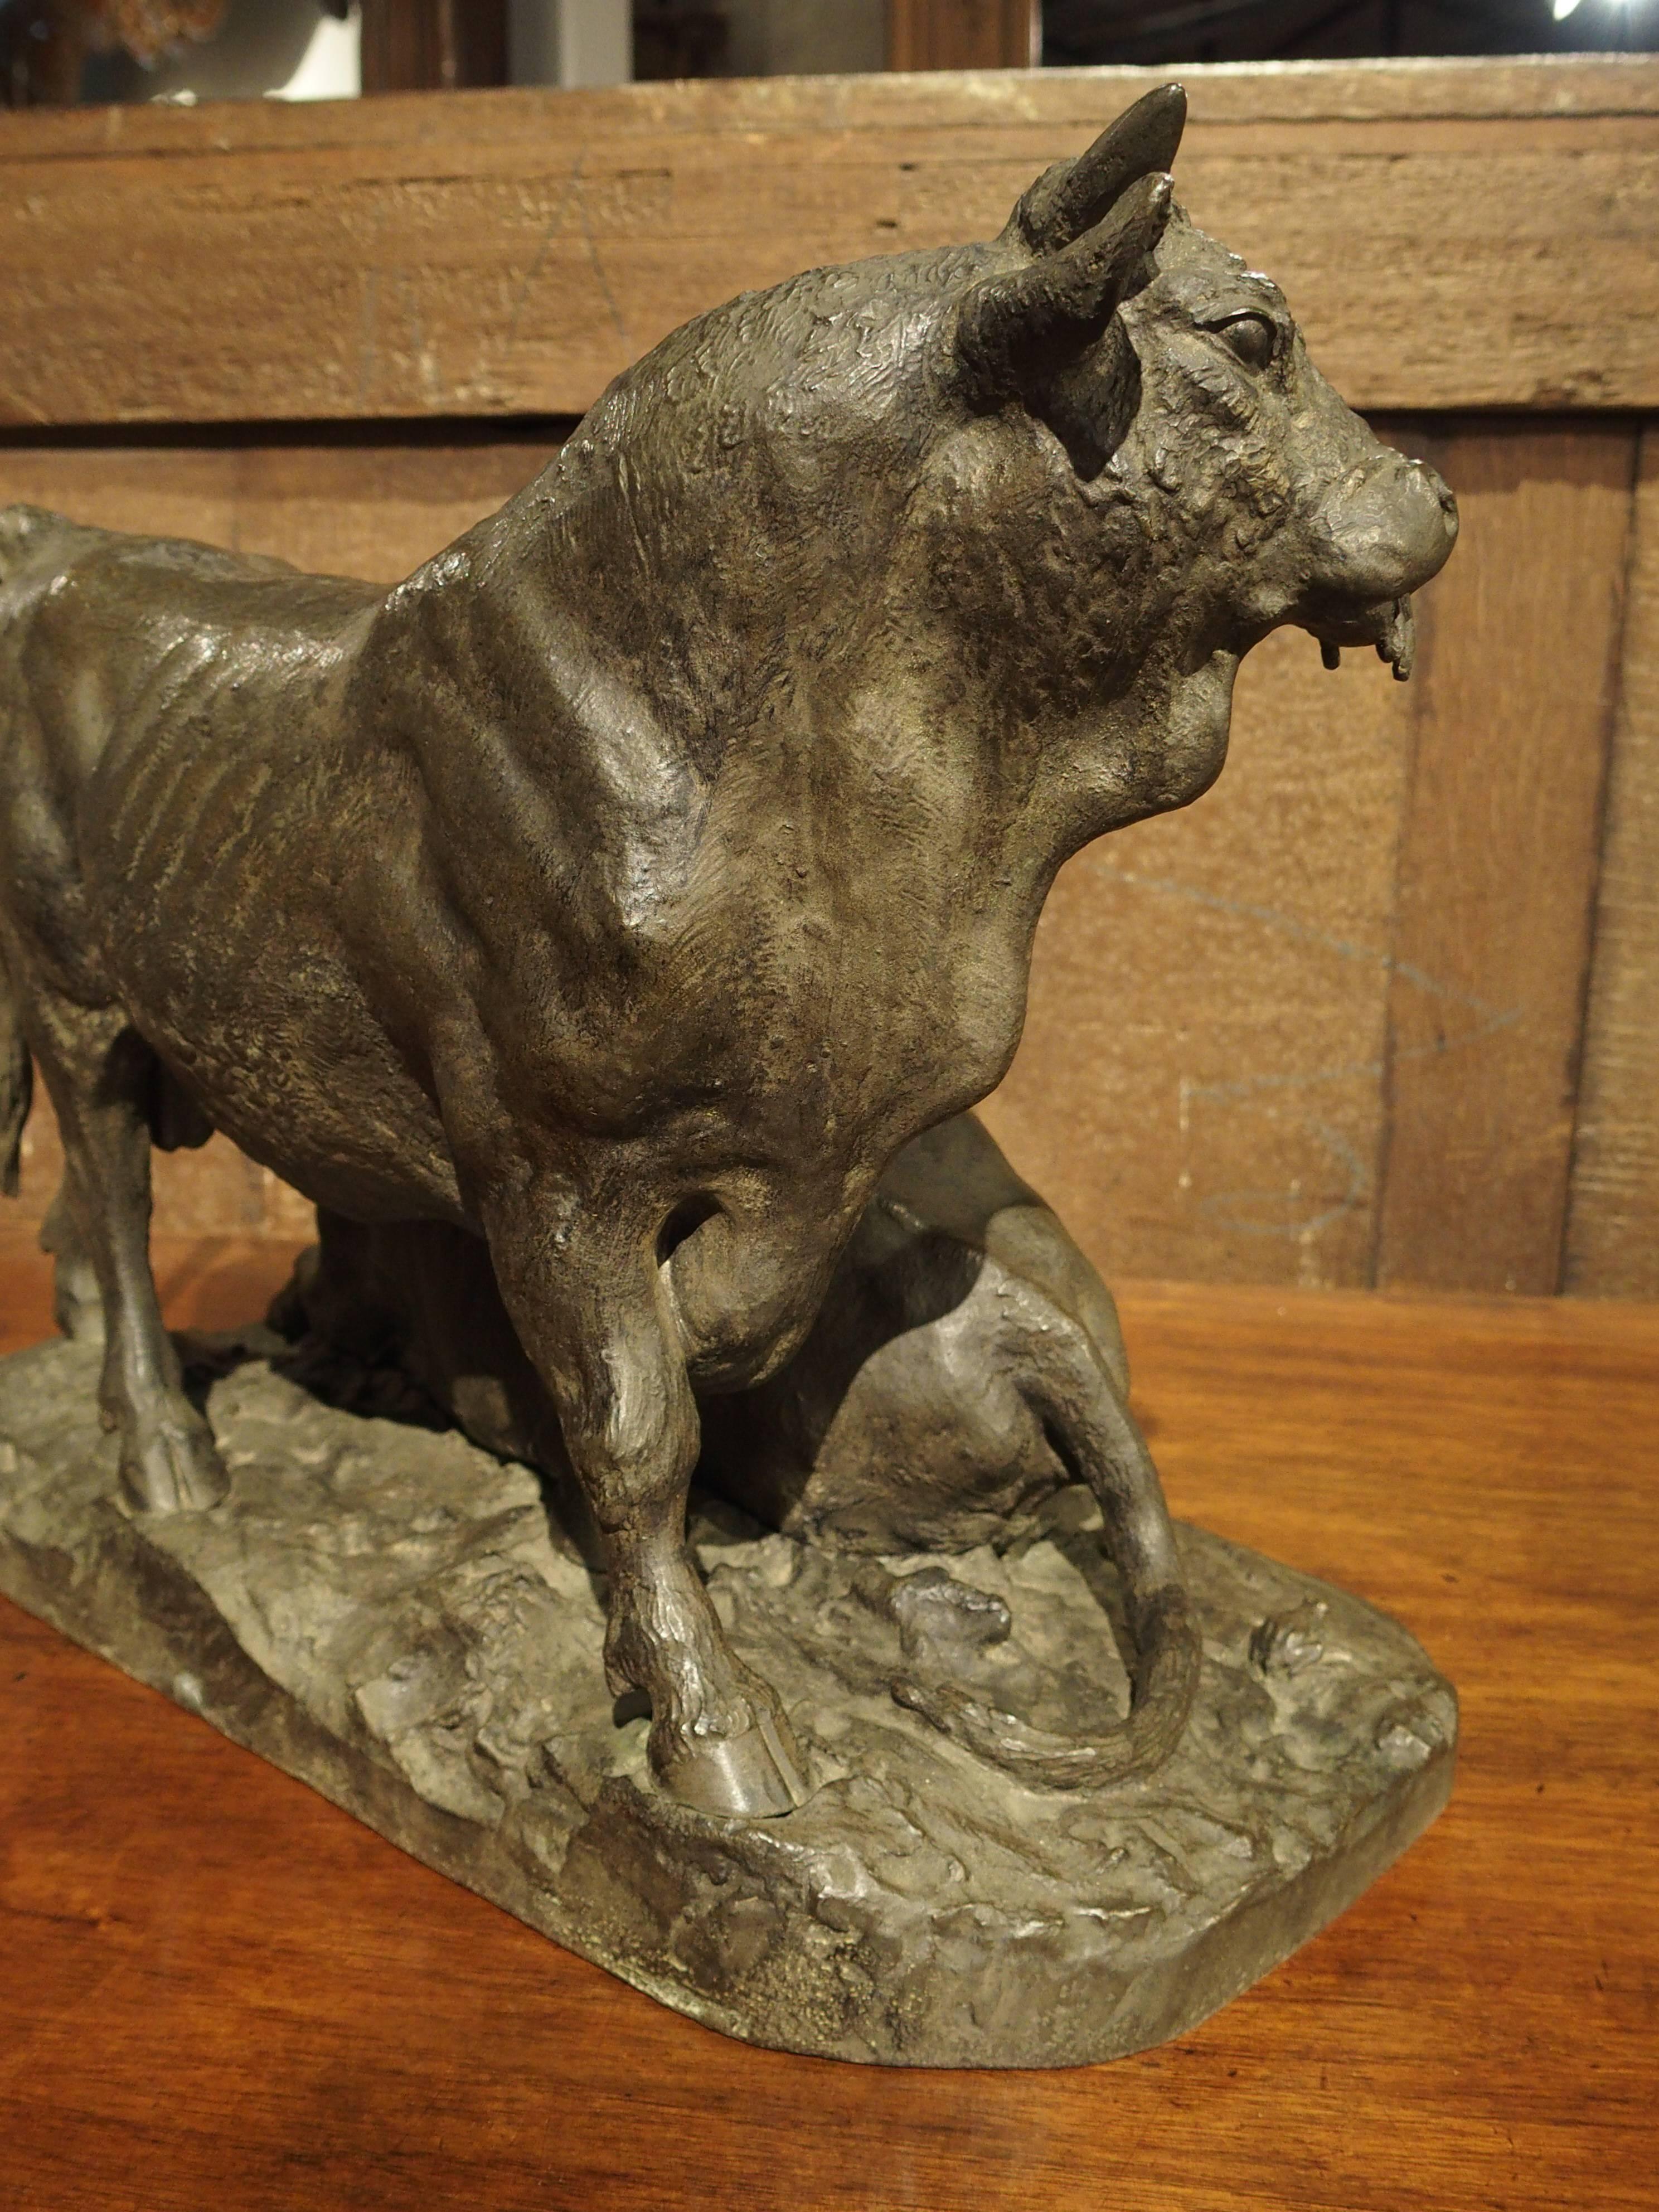 19th Century Antique French Bronze of a Bull and Cow, Christophe Fratin, Early to Mid 1800s